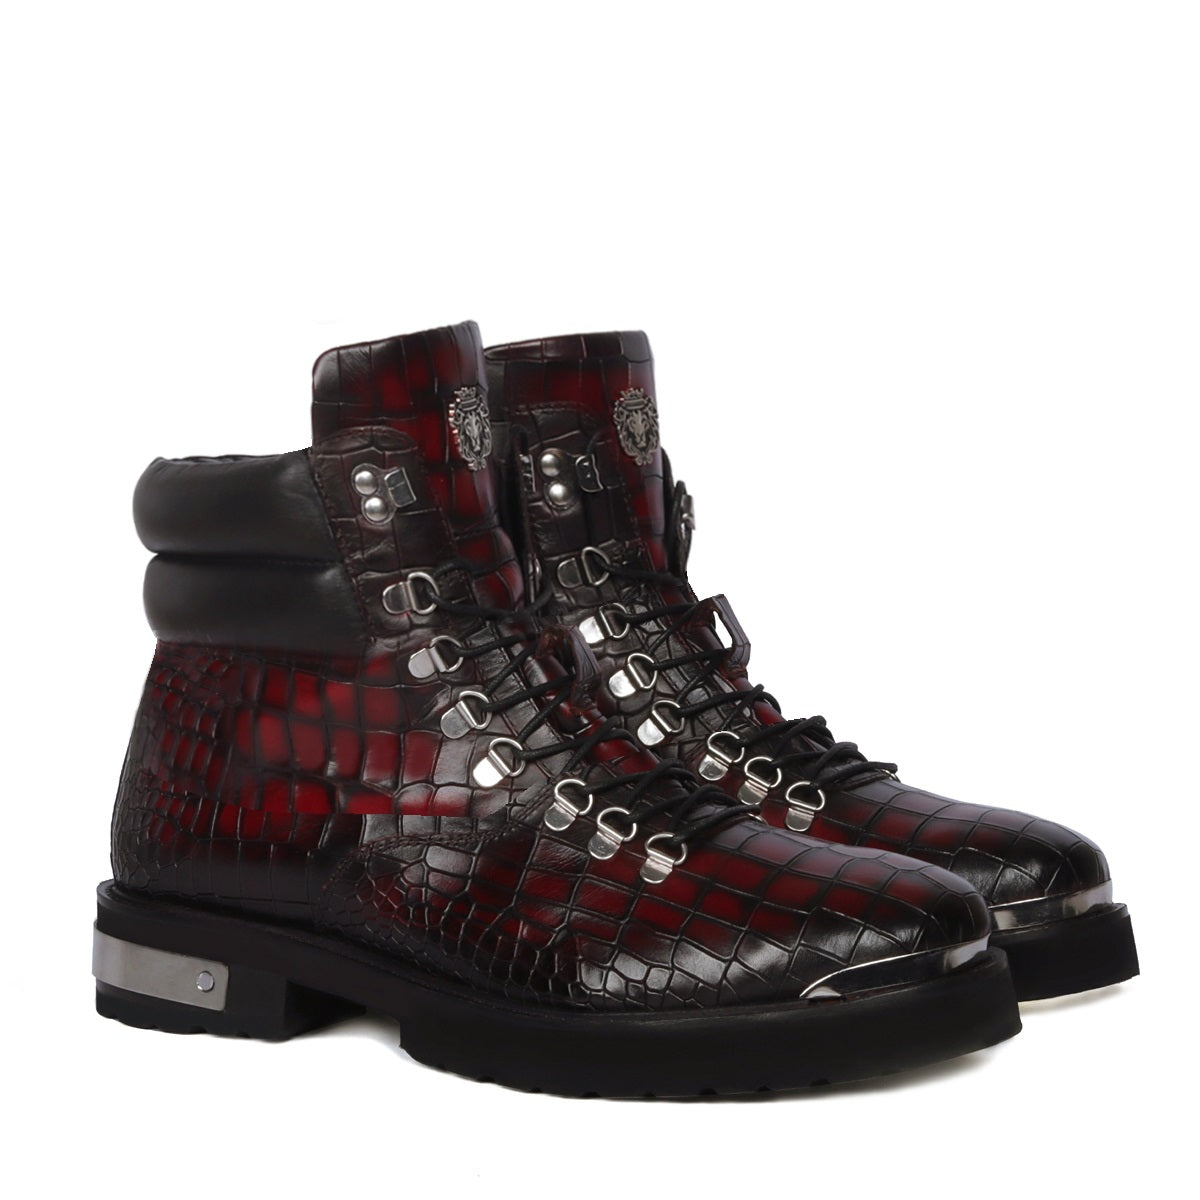 Smokey Wine Lace-Up Chunky Boots Metal Plate Zip Closure Croco Textured Leather By Brune & Bareskin